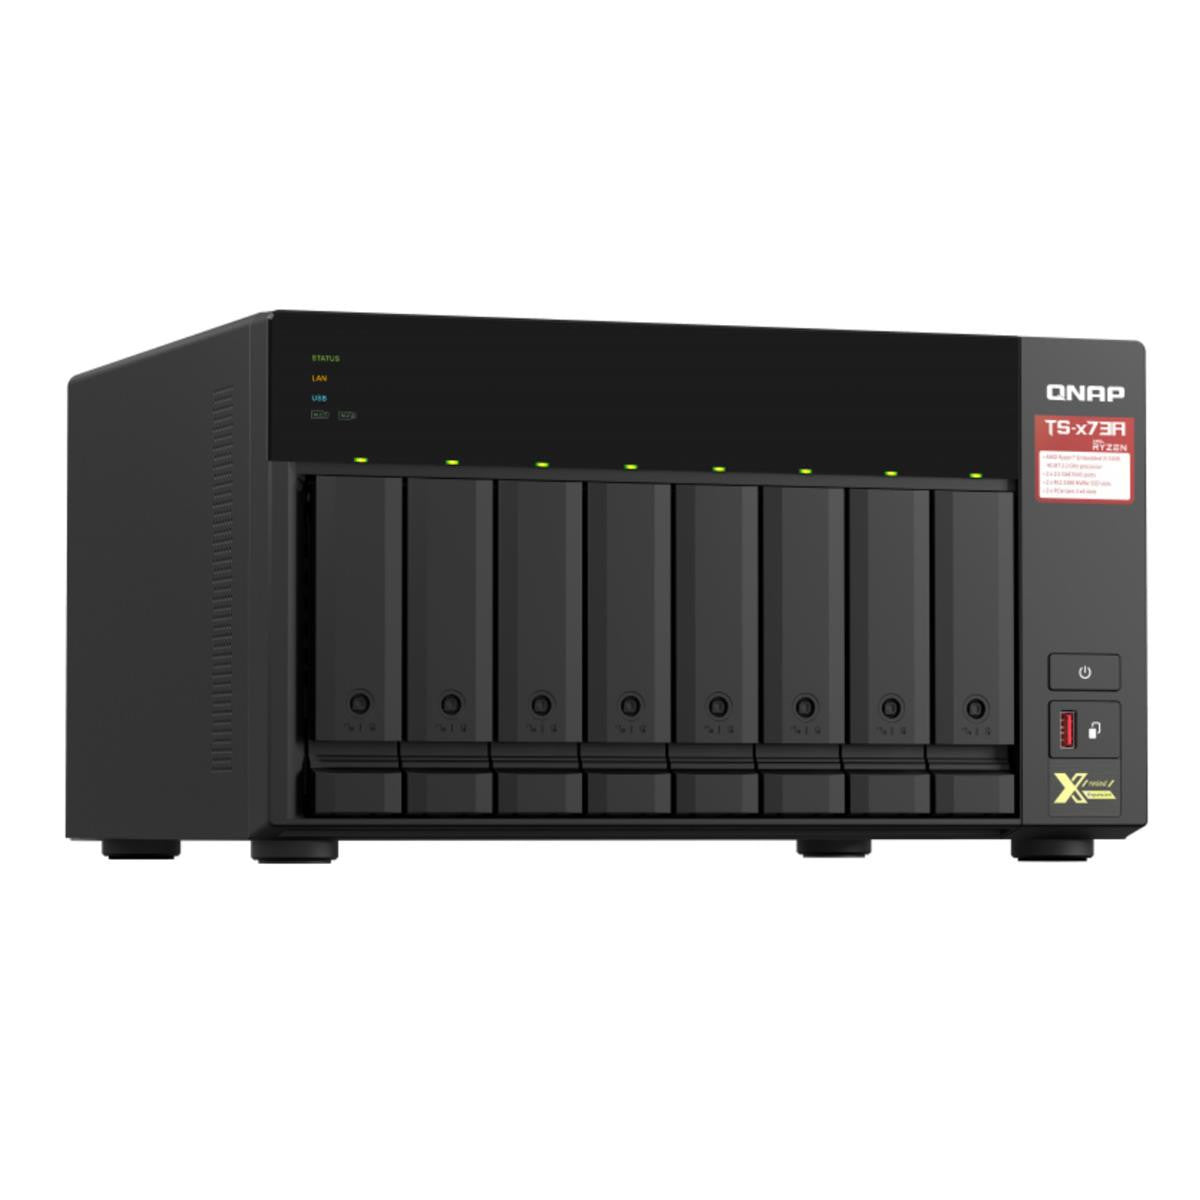 QNAP TS-873A 8-BAY NAS with 8GB DDR4 RAM and 80TB (8x10TB) Seagate Ironwolf NAS Drives Fully Assembled and Tested